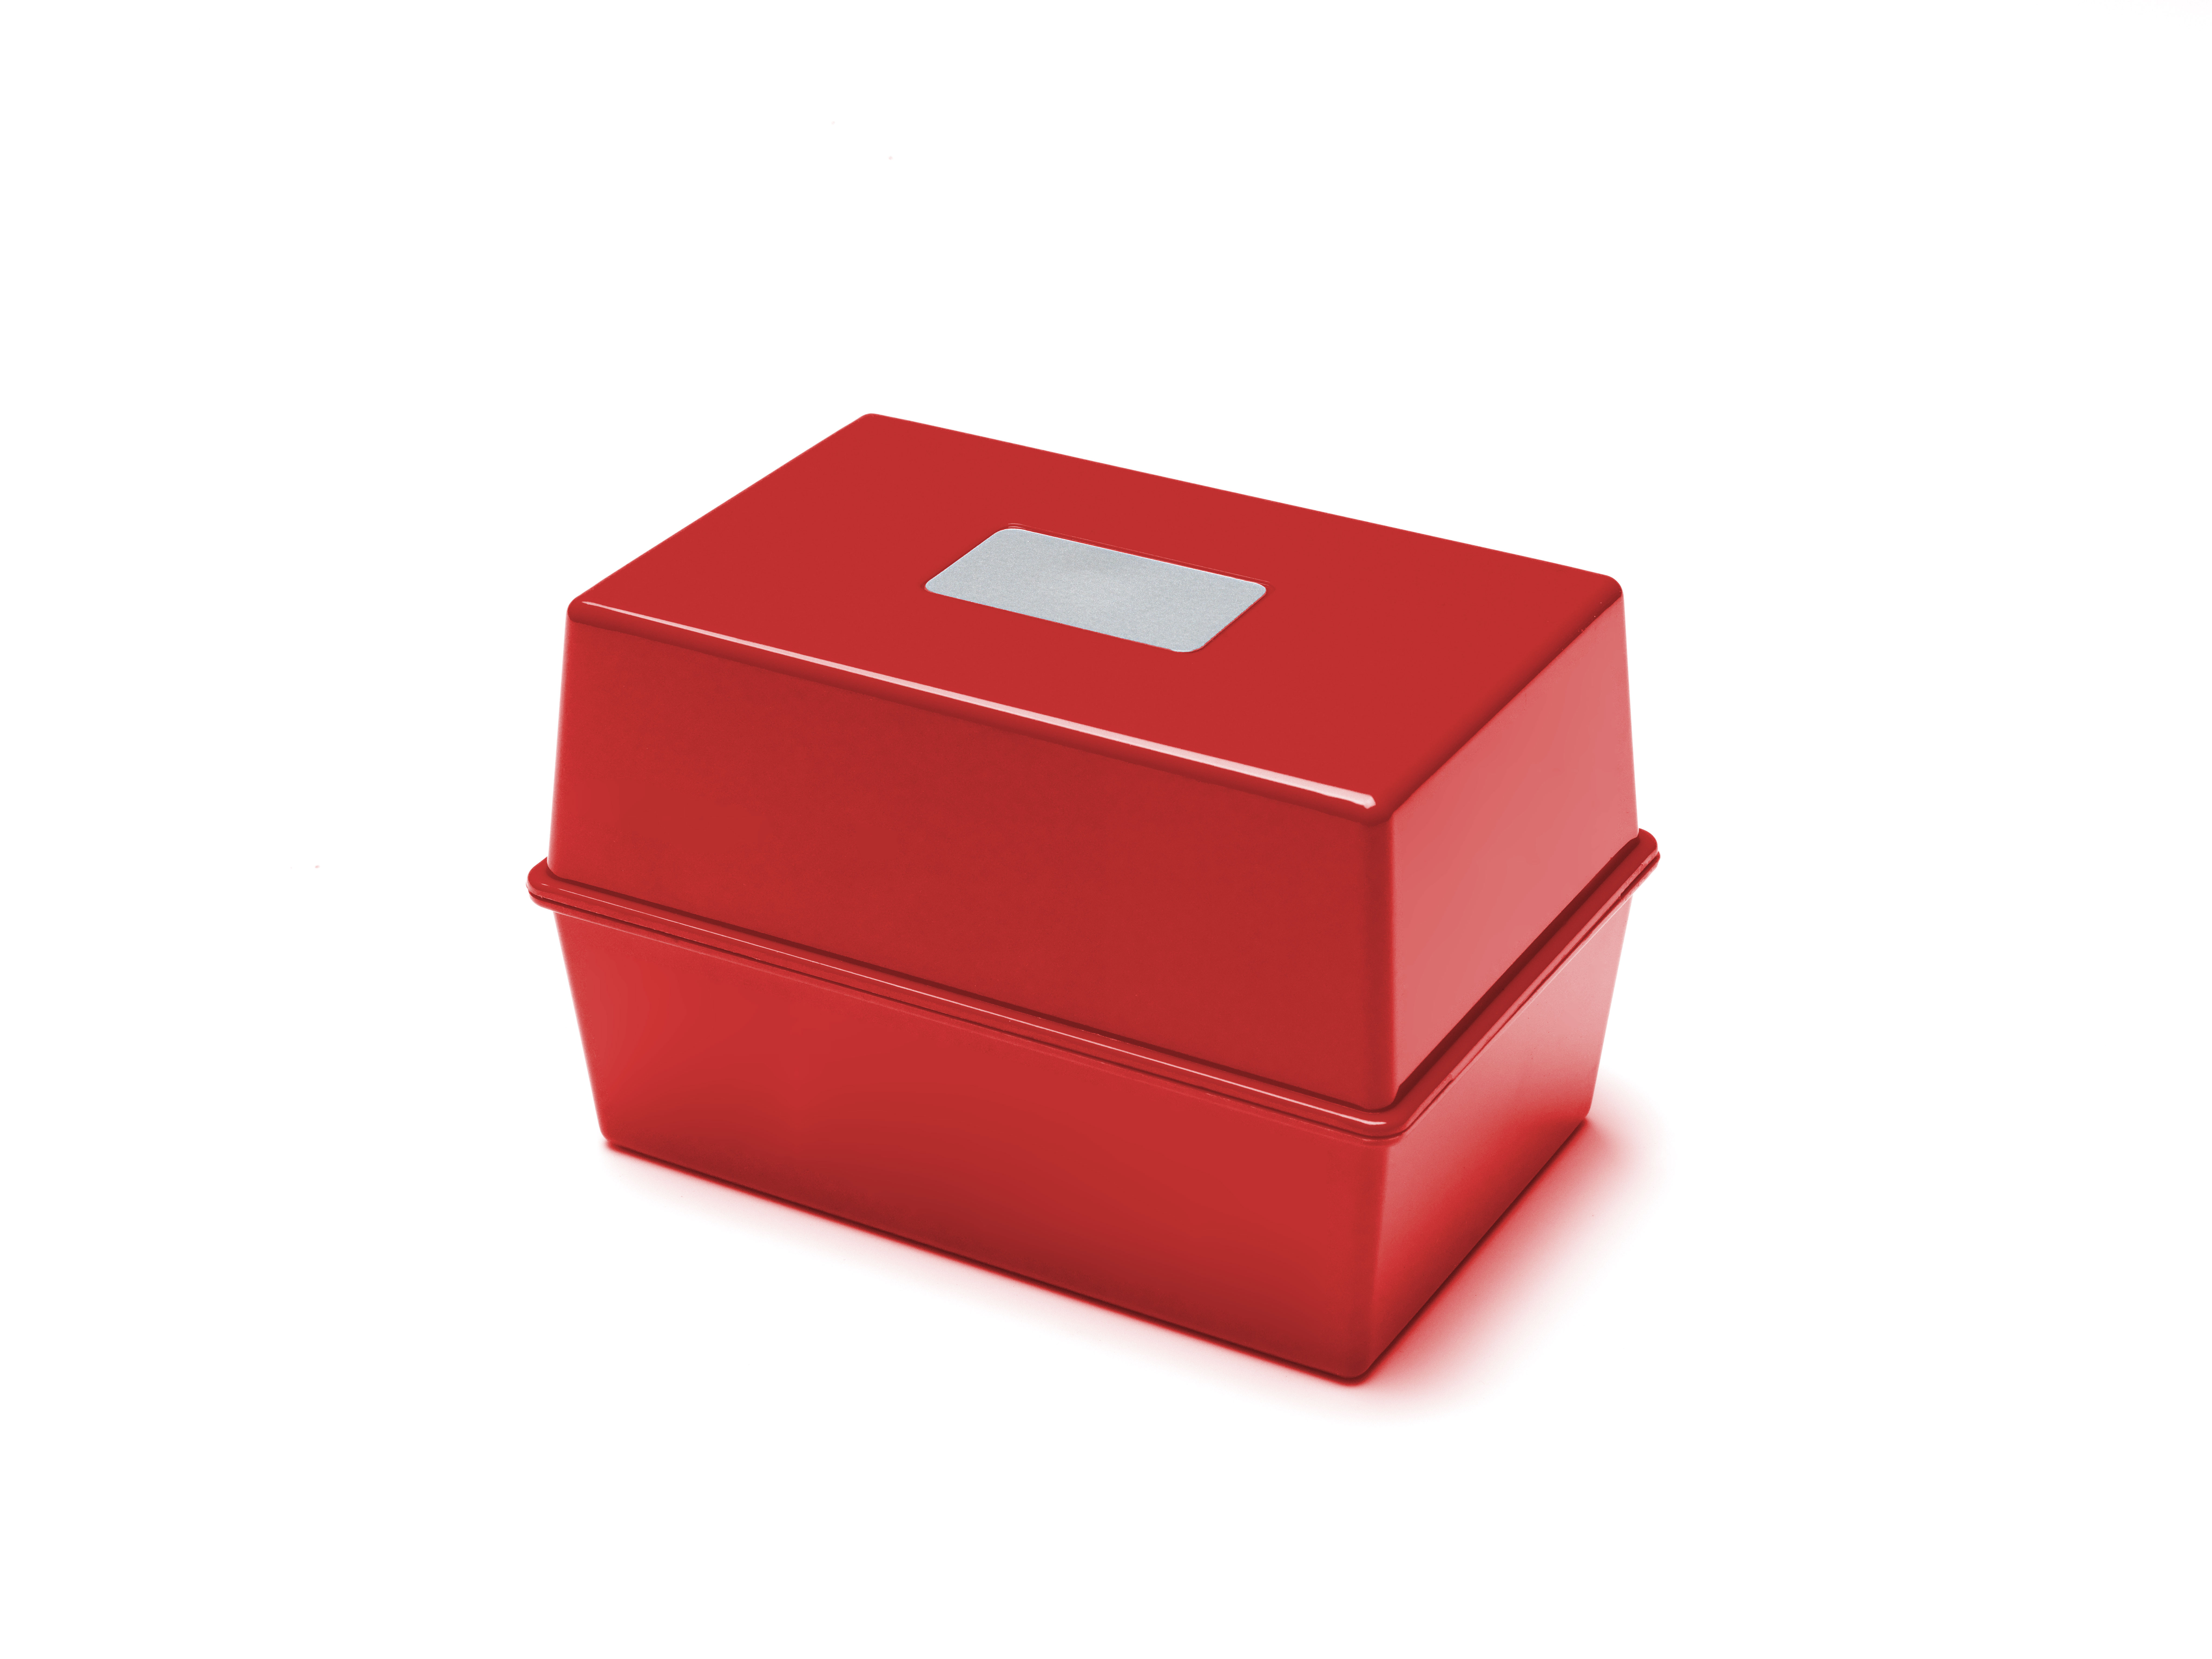 Storage ValueX Deflecto Card Index Box 5x3 inches / 127x76mm Red